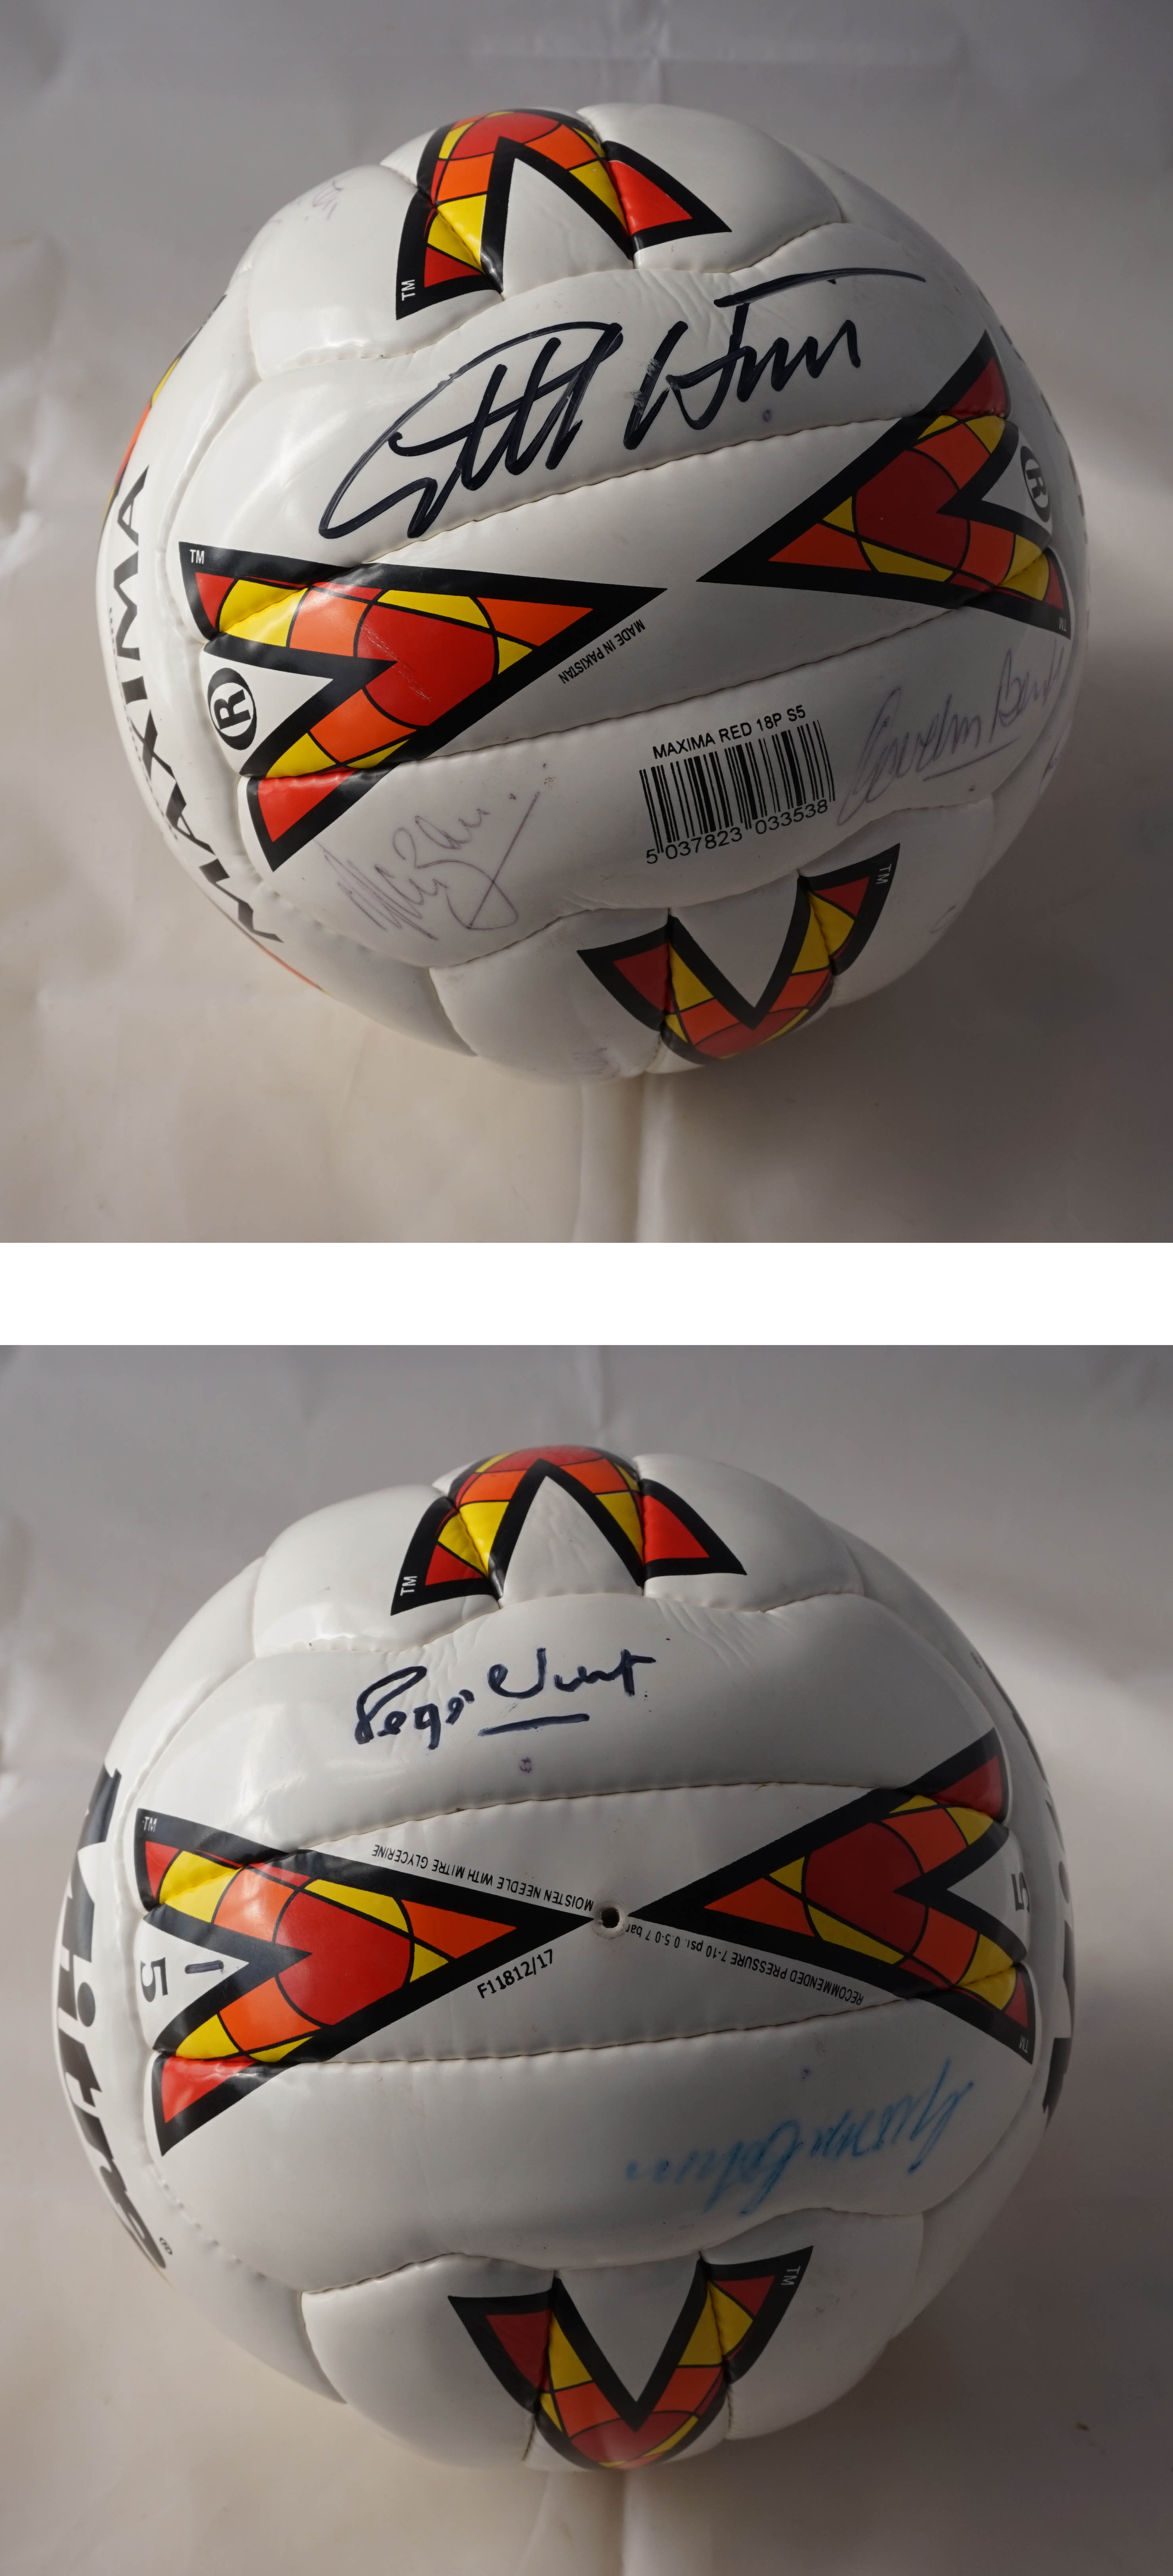 An autographed Mitre Maxima replica football containing signatures from part of the 1966 World Cup